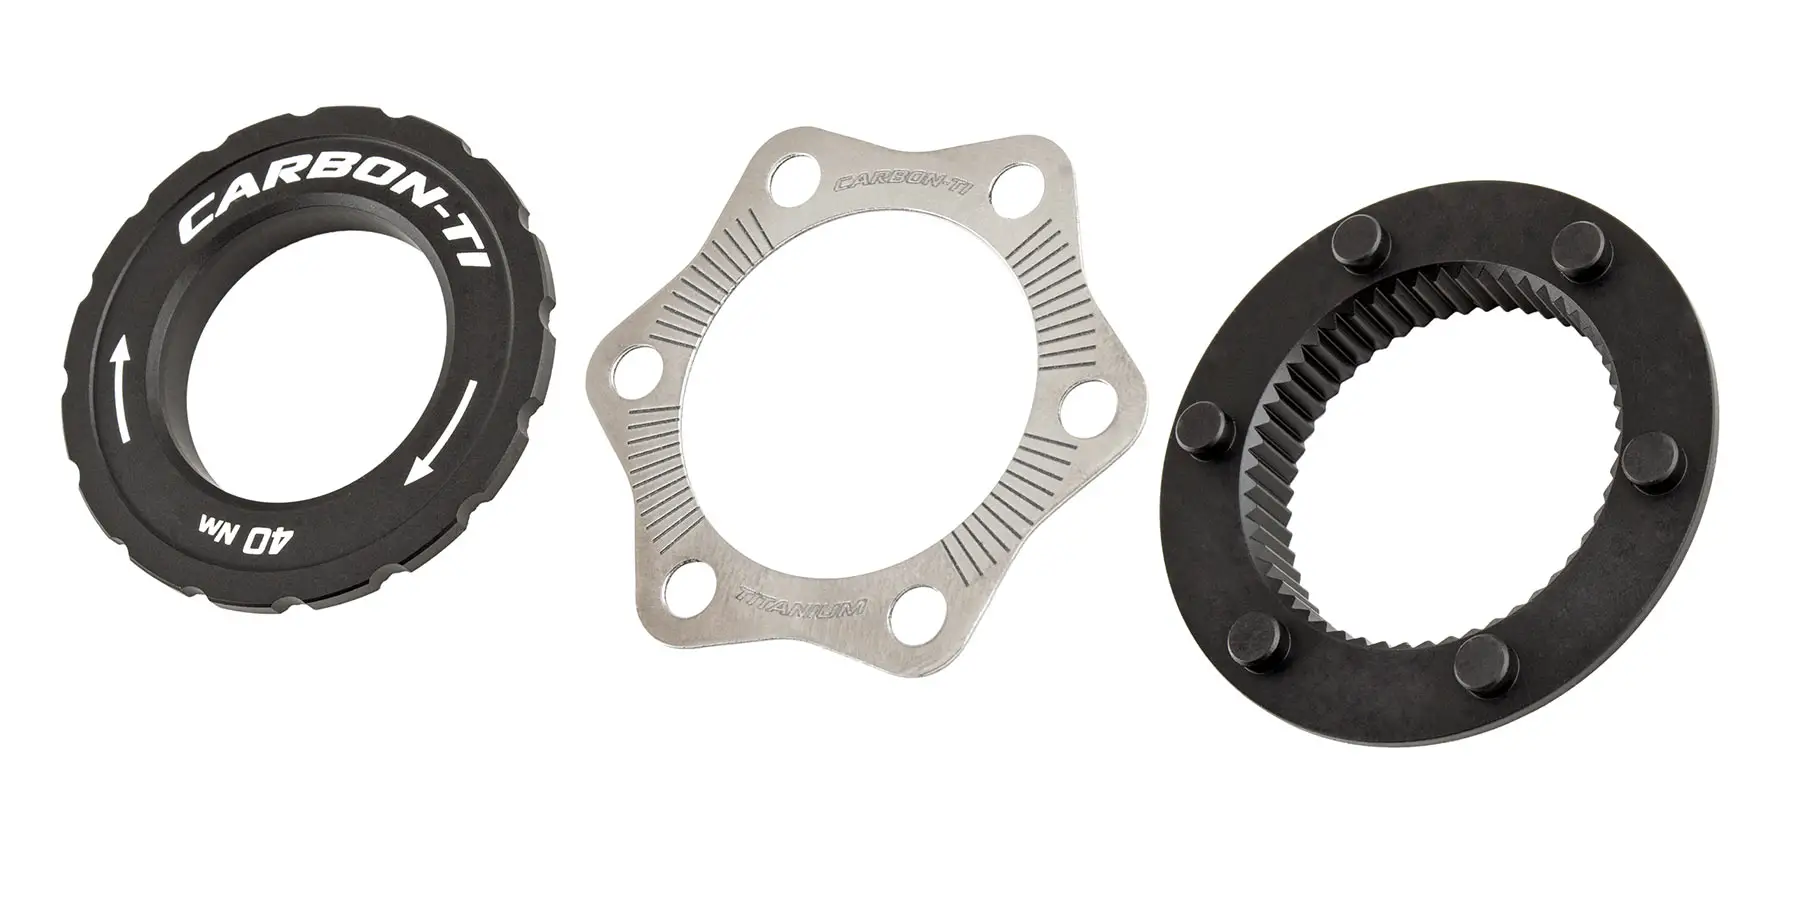 Carbon-Ti X-Rotor SteelCarbon 3 updated lightweight Centerlock disc brake rotors, new adapter